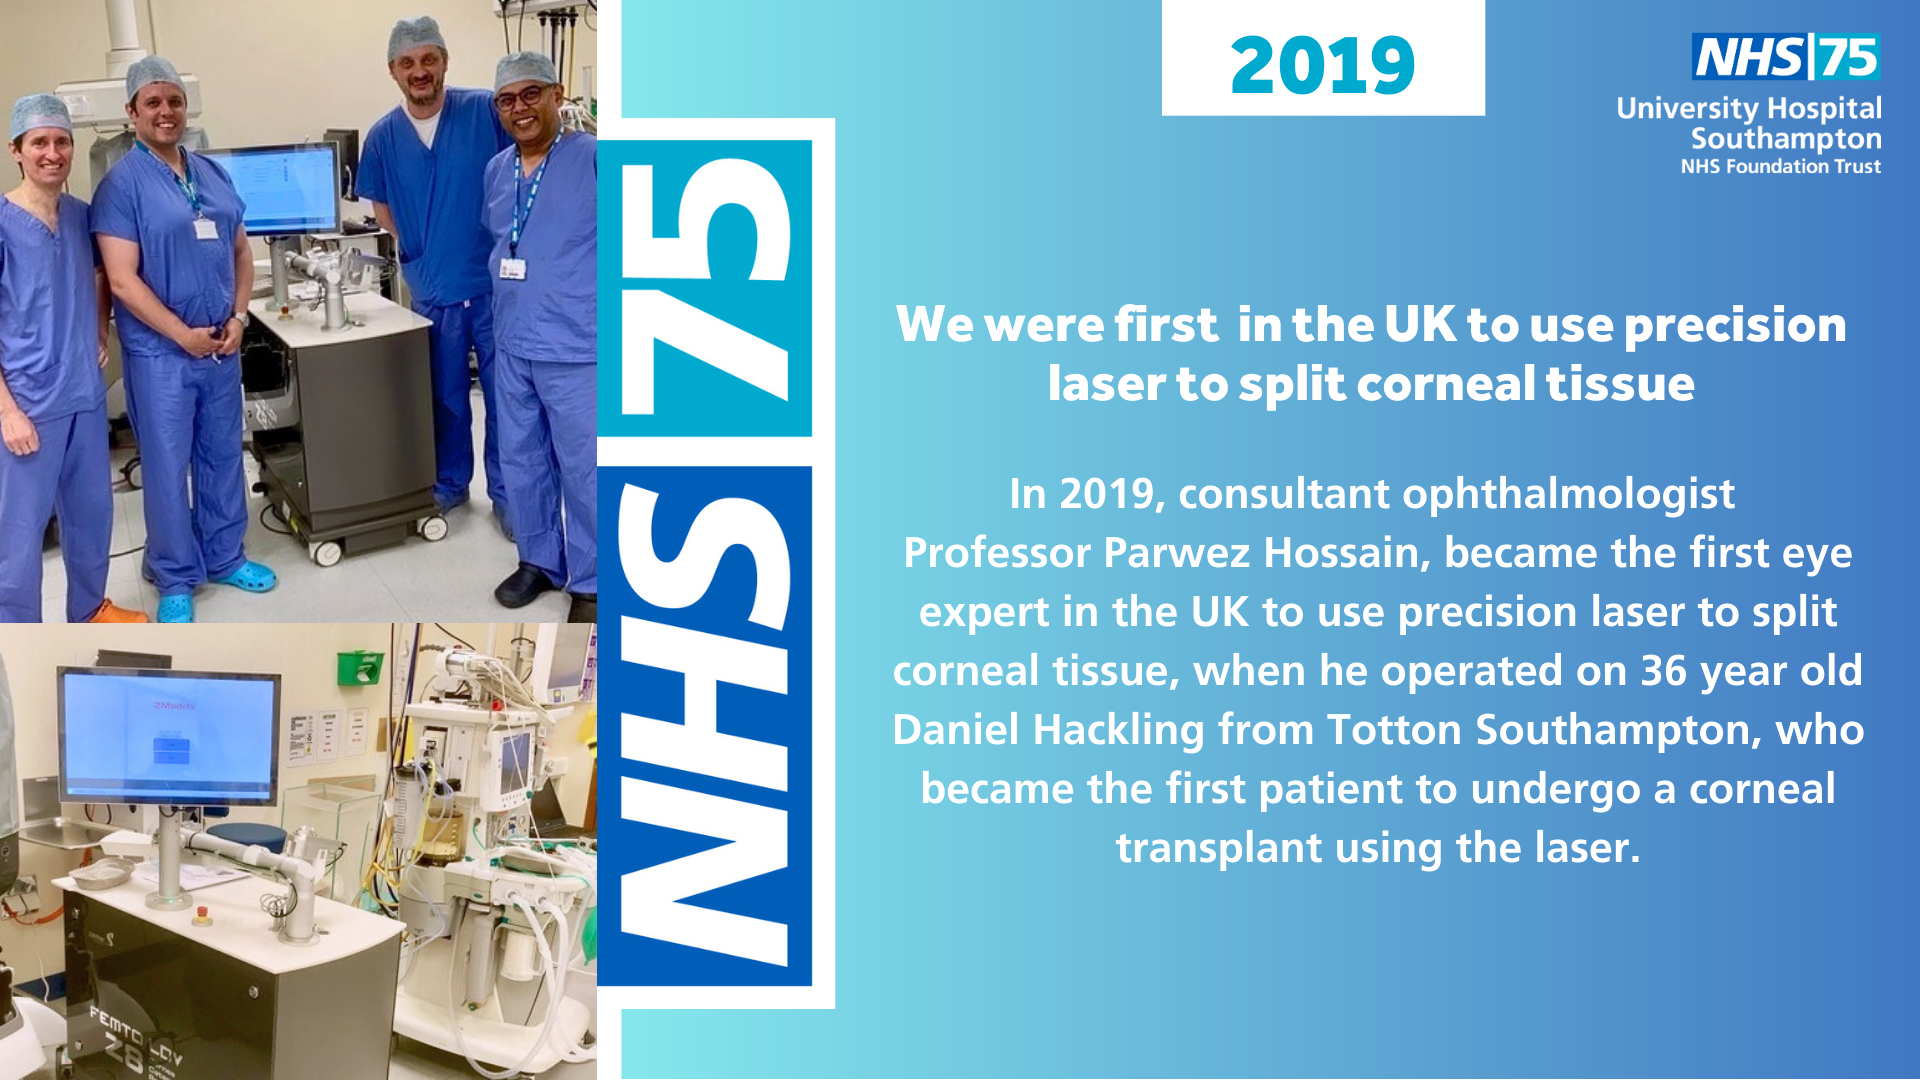 We were first in the UK to use precision laser to split corneal tissue